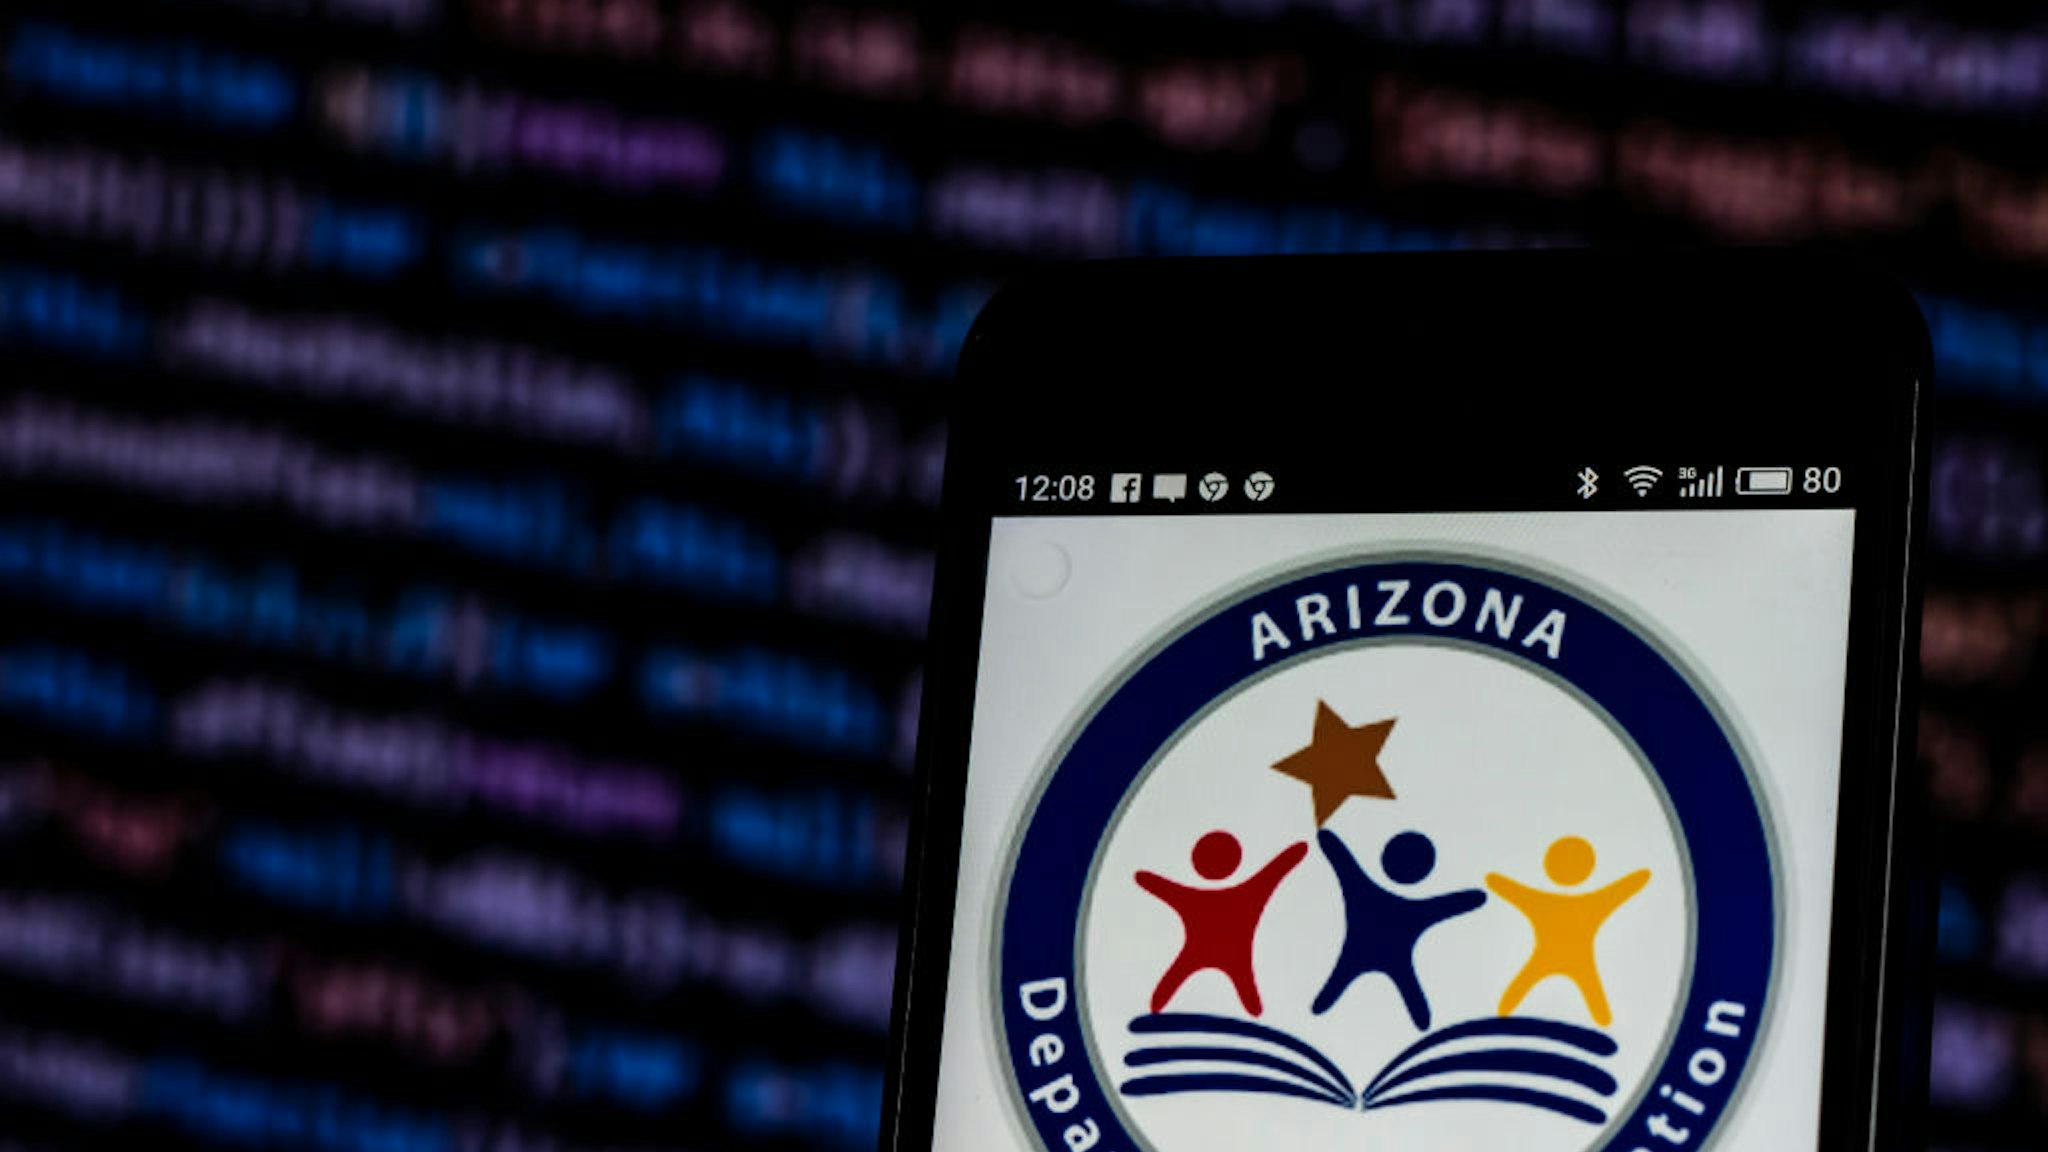 KIEV, UKRAINE - 2018/10/31: In this photo illustration, the Arizona Department of Education State agency logo seen displayed on a smartphone. Arizona Department of Education is an Arizona state agency overseeing public education. It is headquartered at 1535 West Jefferson Street in Downtown Phoenix, Arizona, United States. Ratification of the Arizona Constitution created the Arizona Department of Public Education.